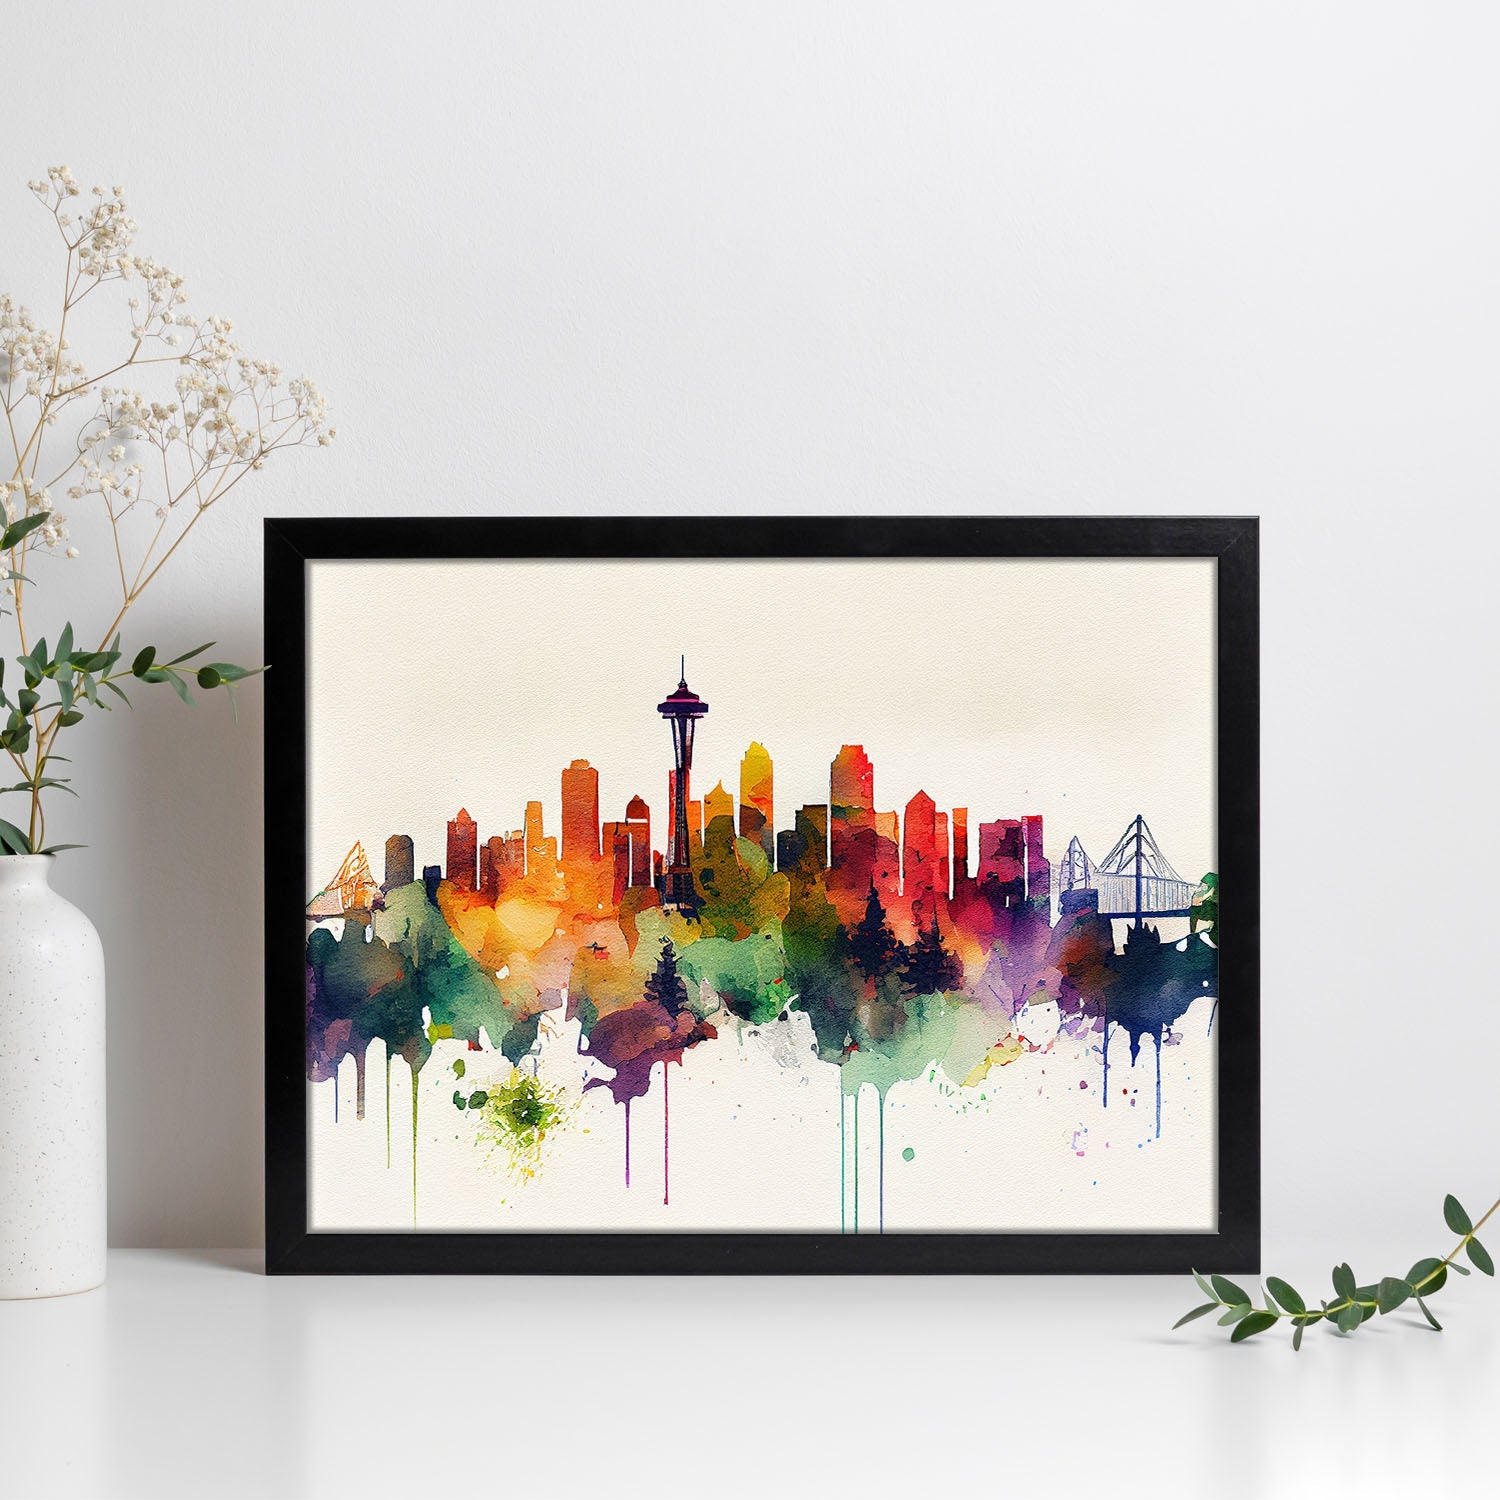 Nacnic watercolor of a skyline of the city of Seattle. Aesthetic Wall Art Prints for Bedroom or Living Room Design.-Artwork-Nacnic-A4-Sin Marco-Nacnic Estudio SL